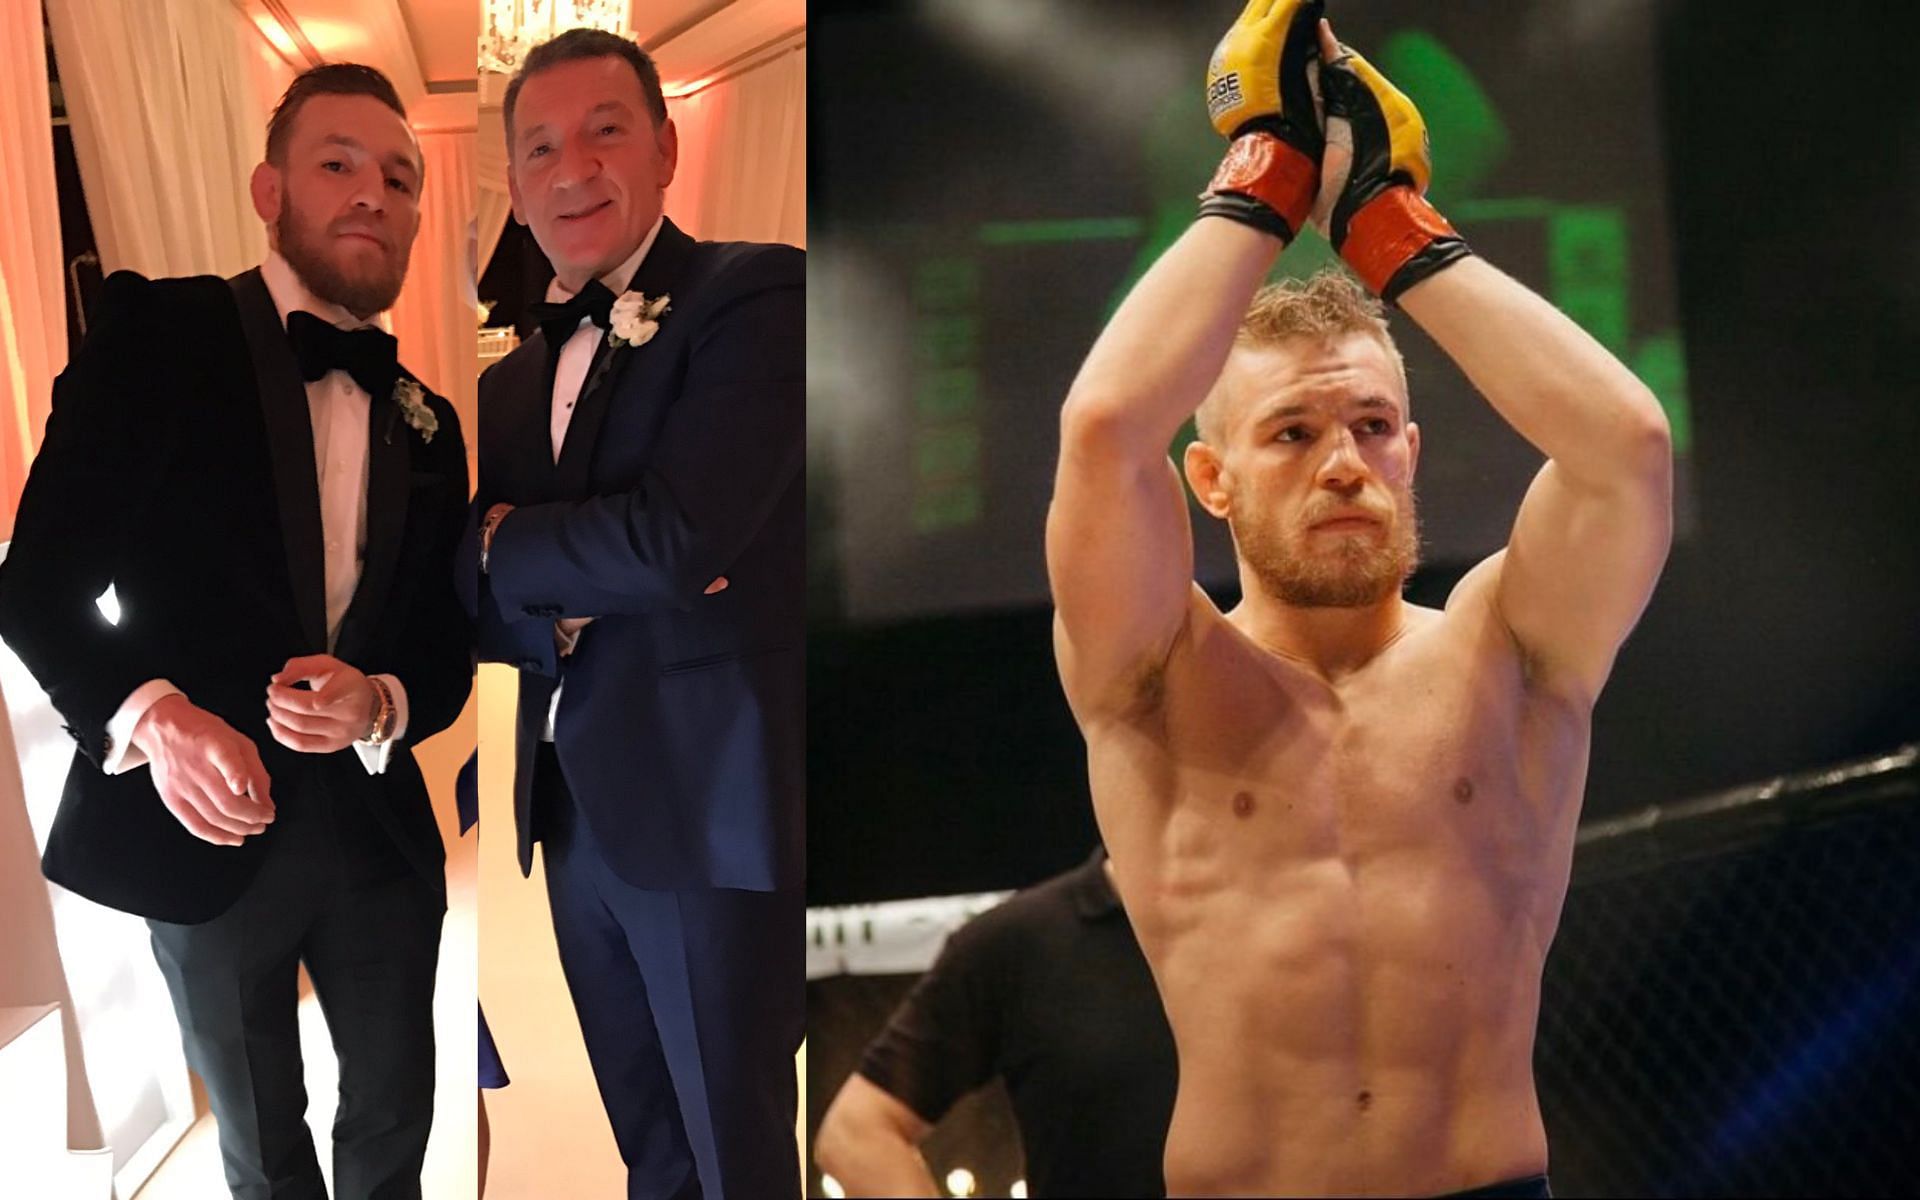 Conor McGregor with his father (left) and at Cage Warriors. [via X @CageWarriors and @TheNotoriousMMA]